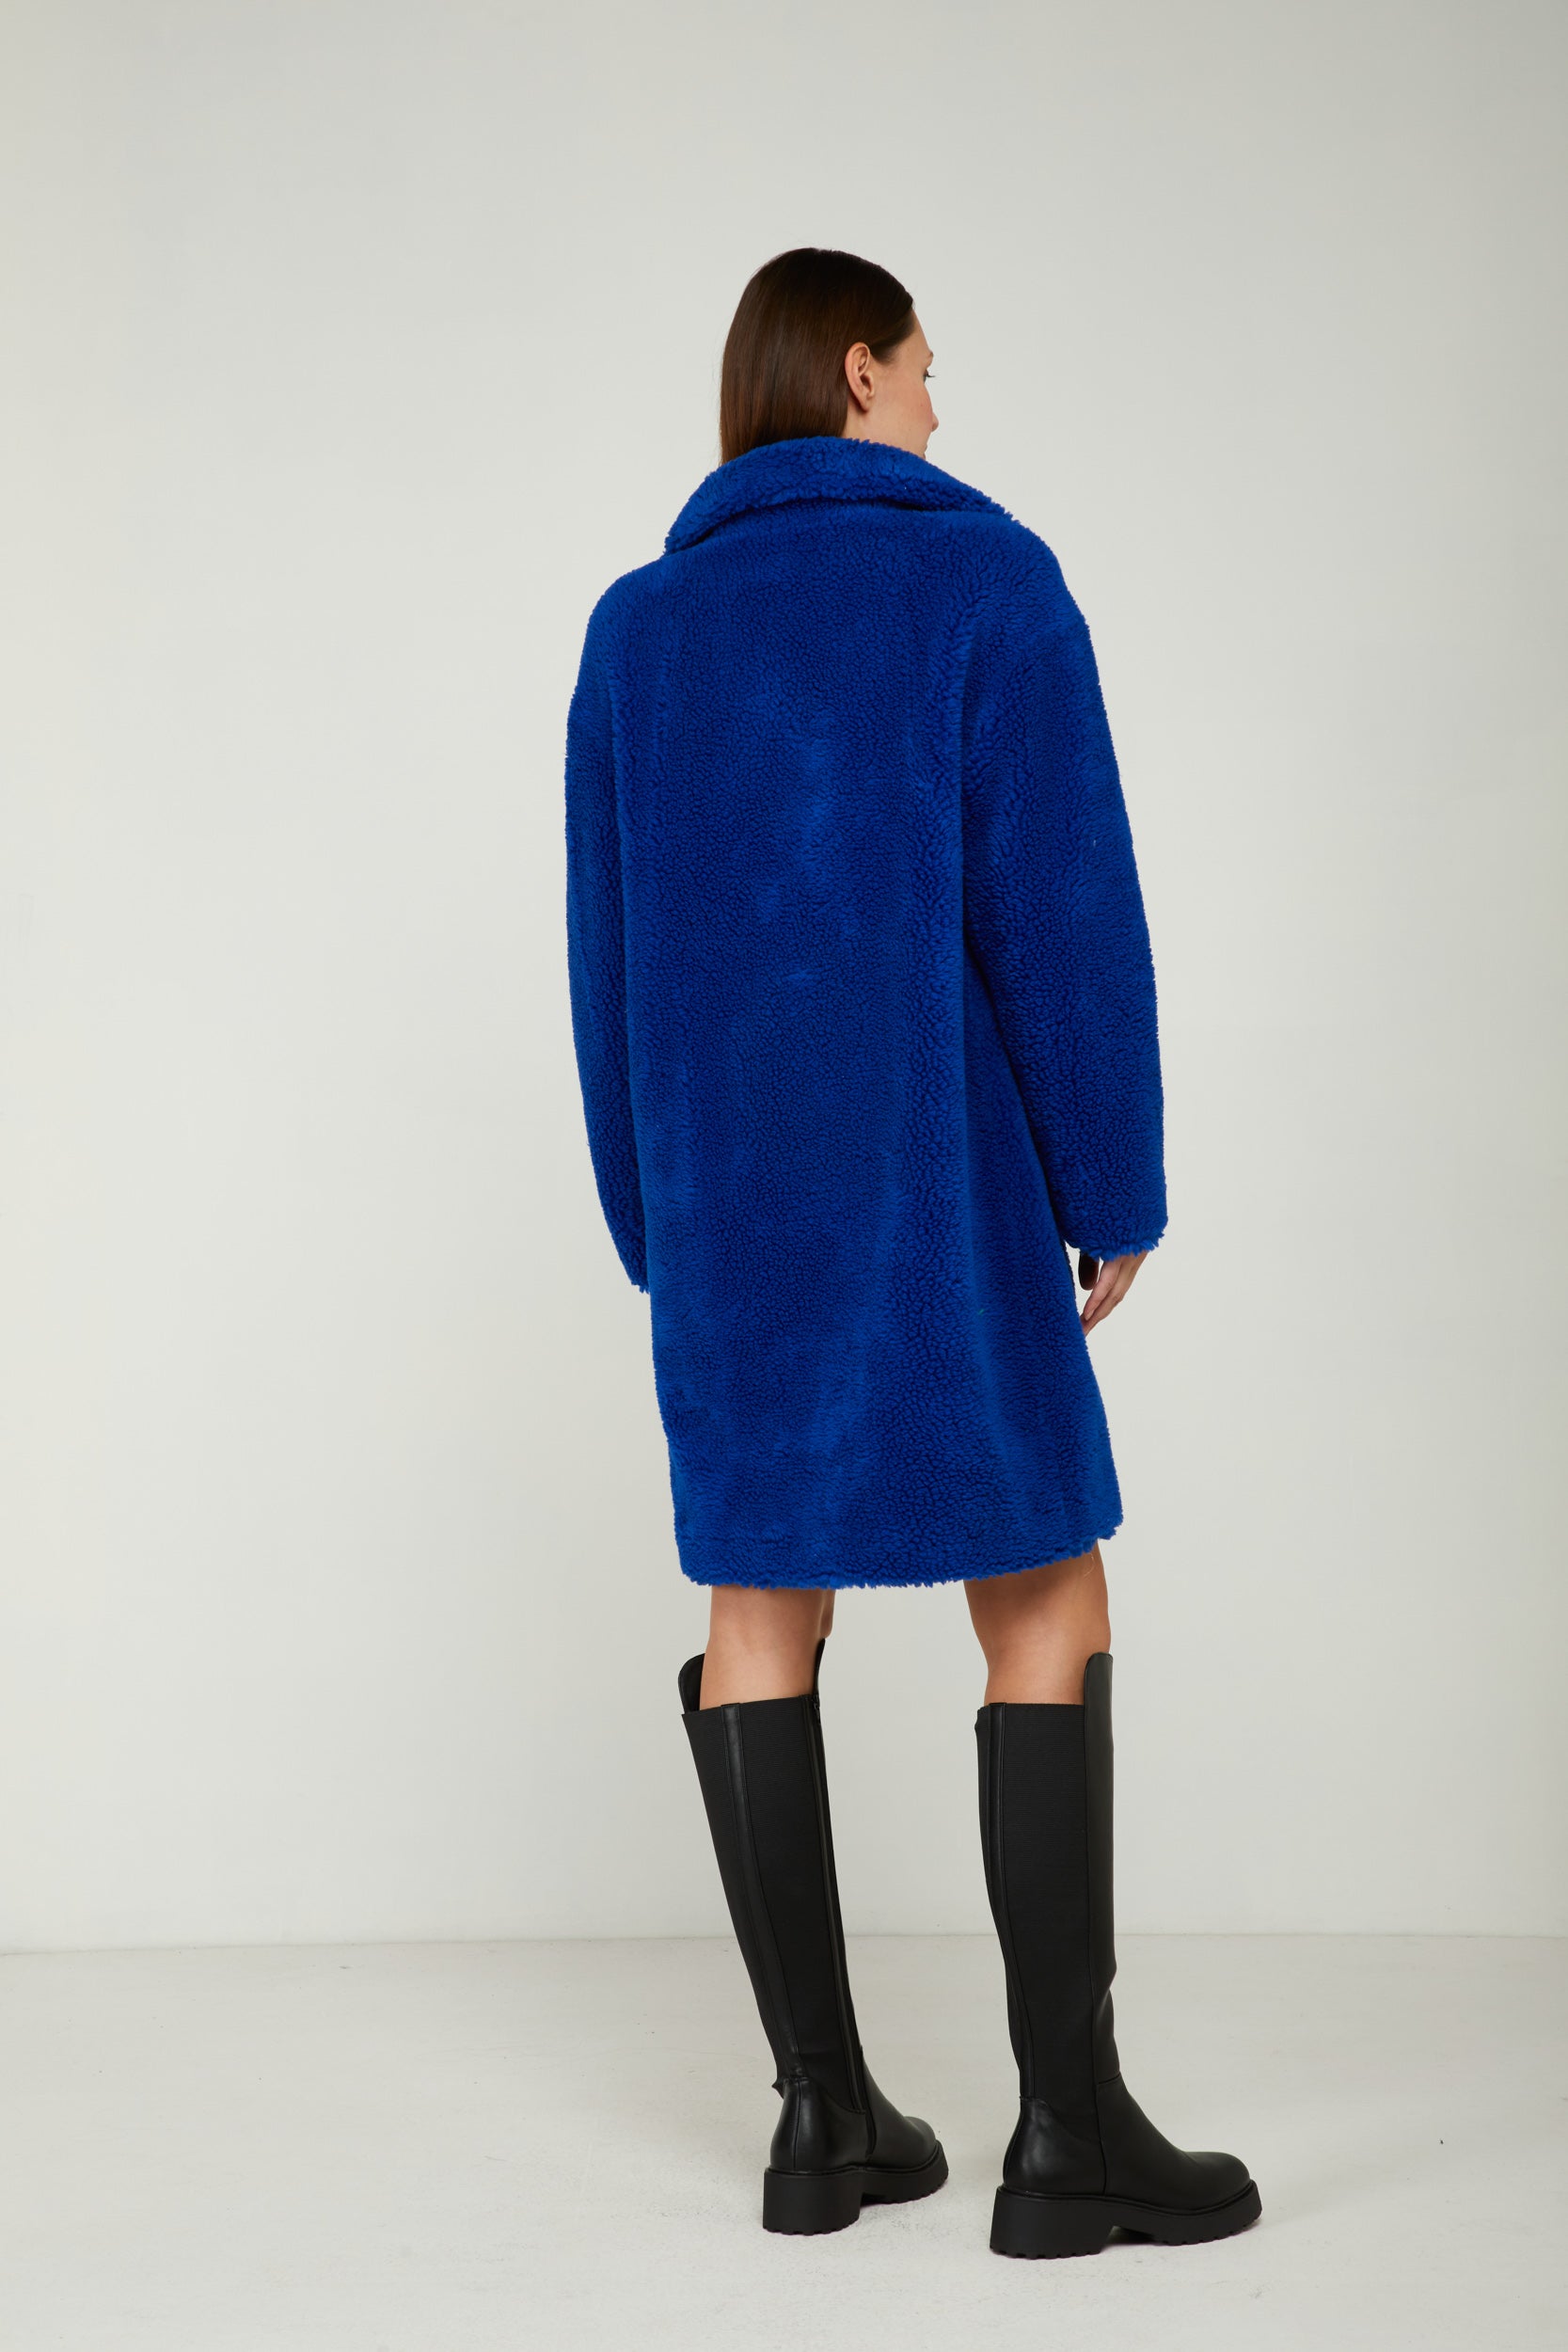 STAND STUDIO Electric Blue "Camille Cocoon" Coat